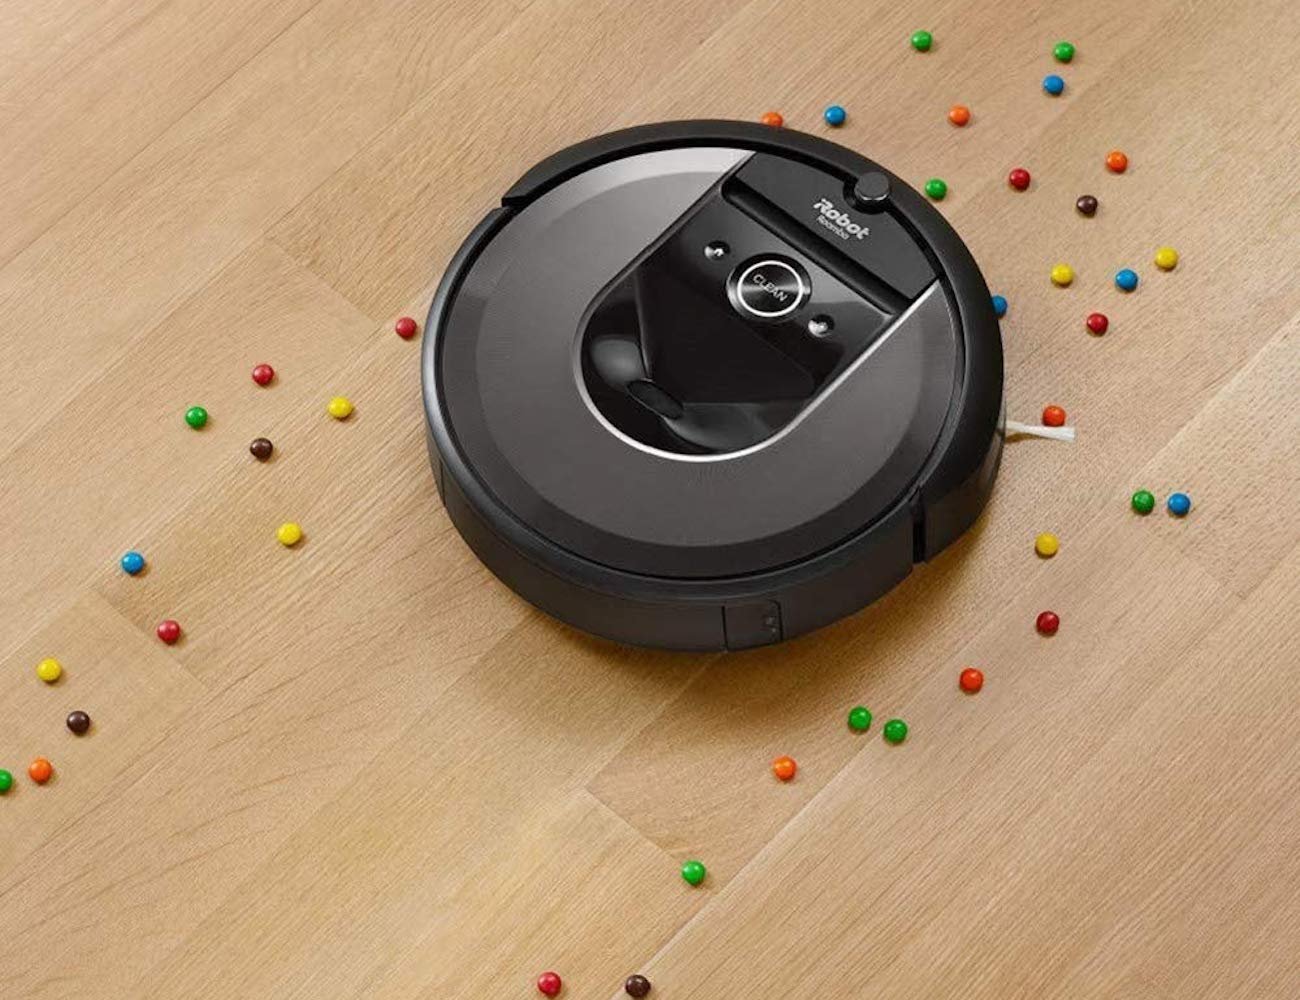 iRobot Roomba i7+ Wi-Fi Connected Robot Automatic Dirt Disposal Vacuum leaves nothing behind